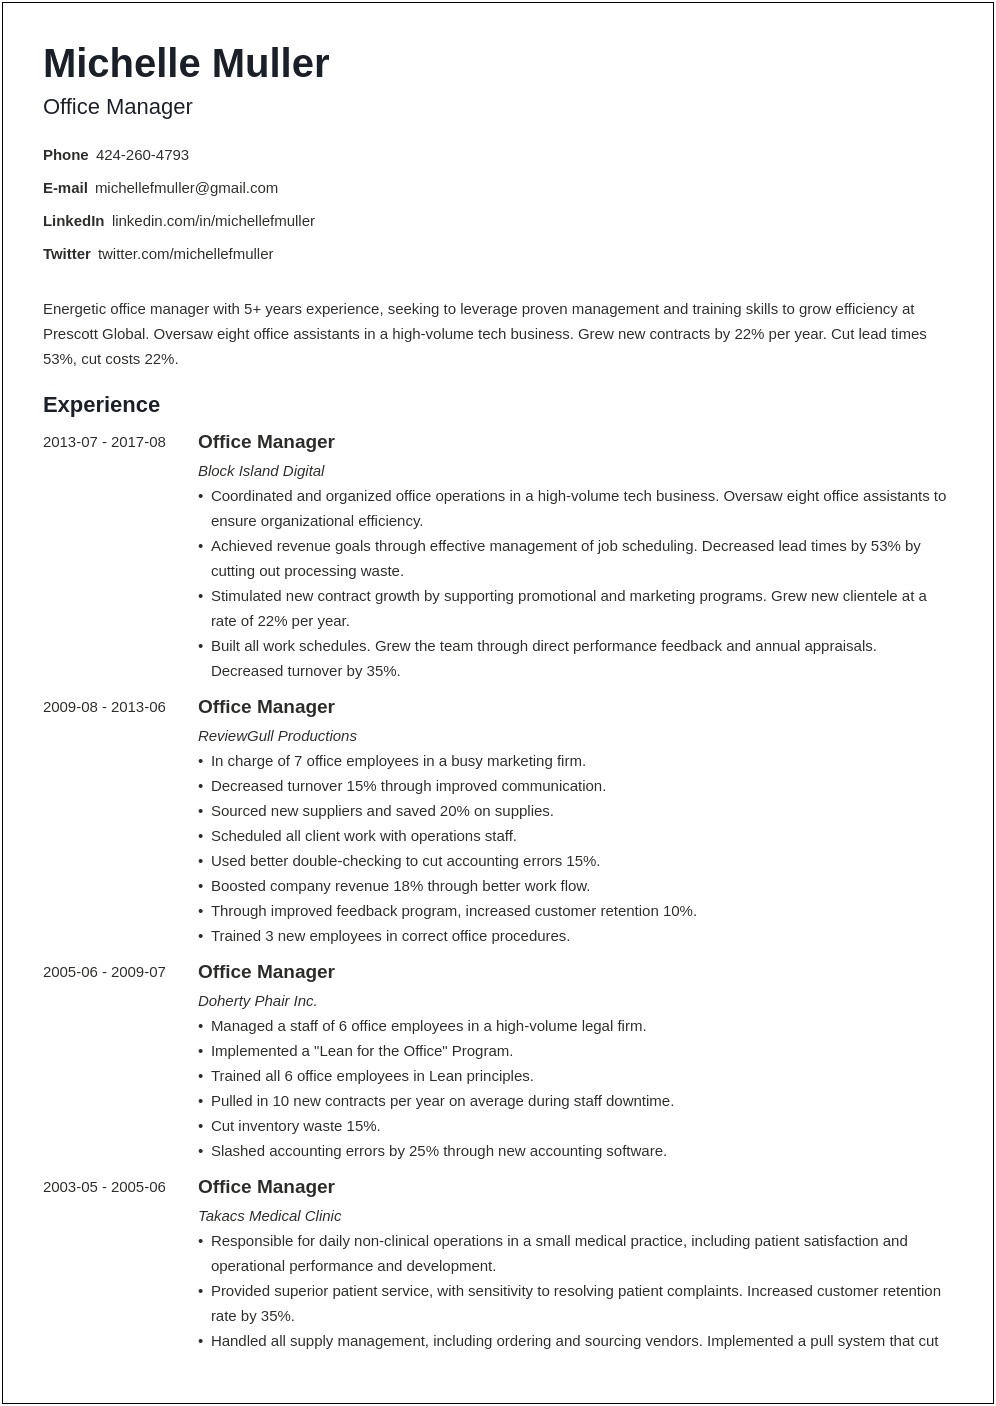 Writing Almost 5 Years Experience In Resume